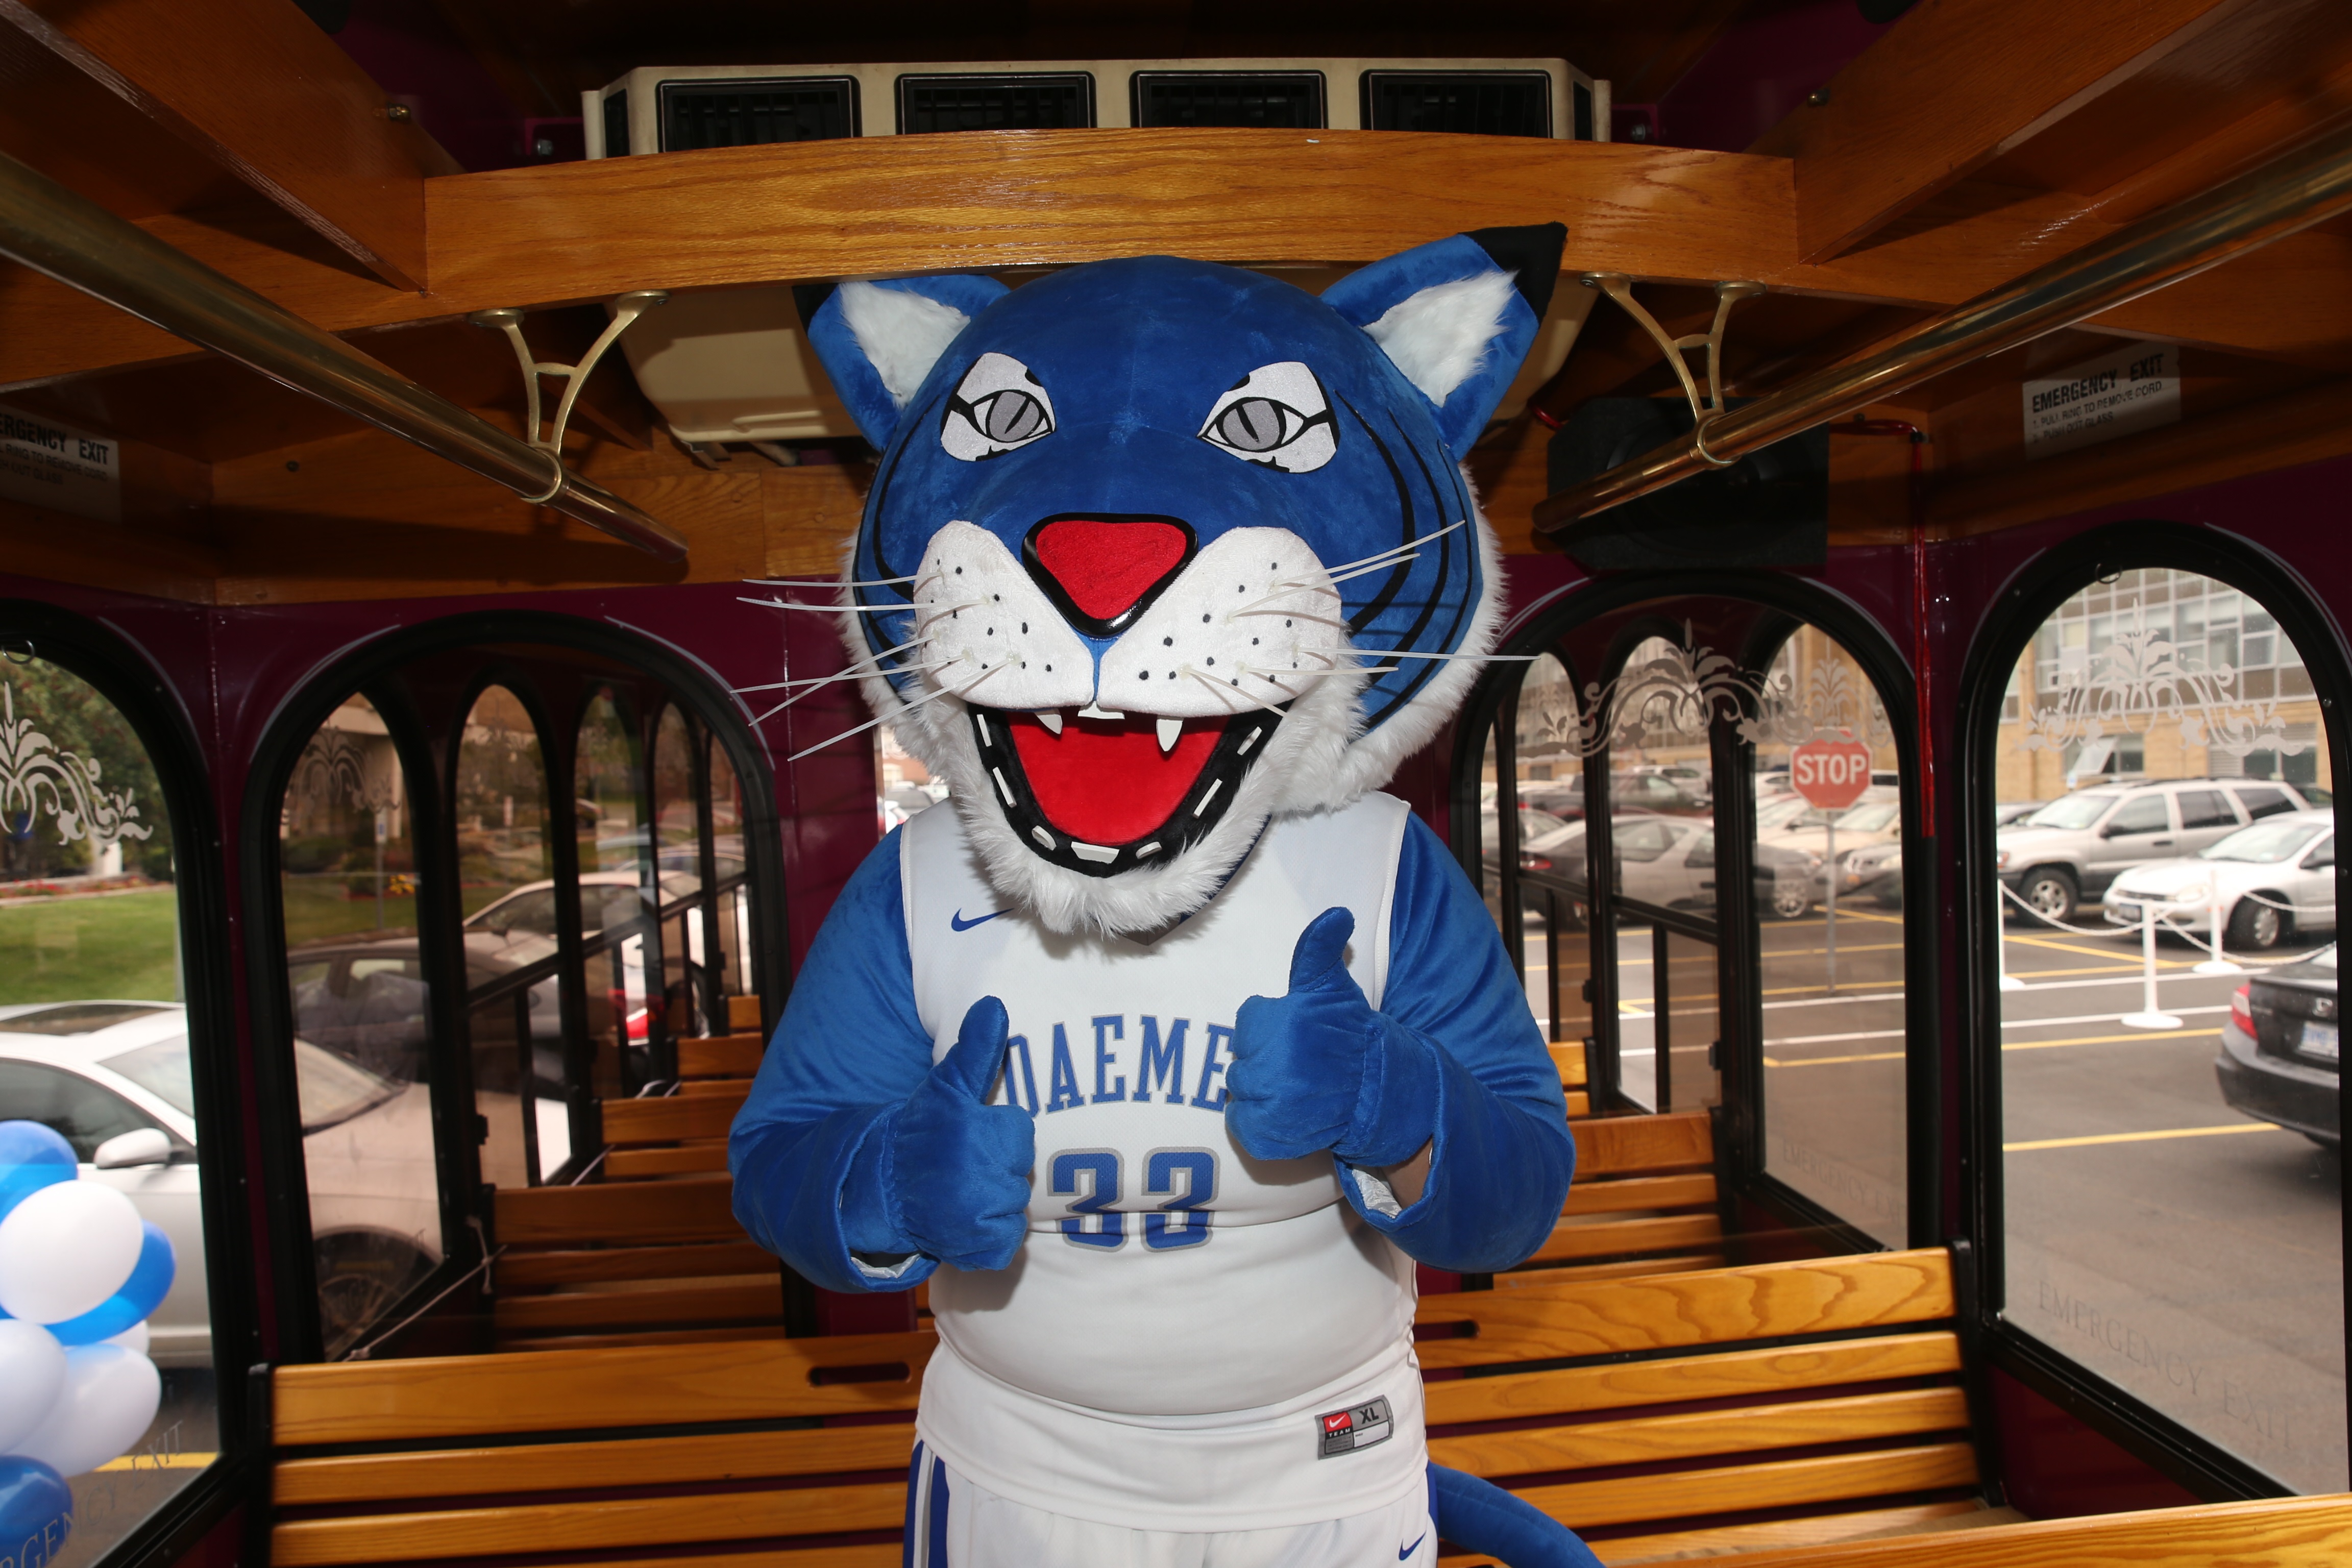 Willie Mascot in Trolley